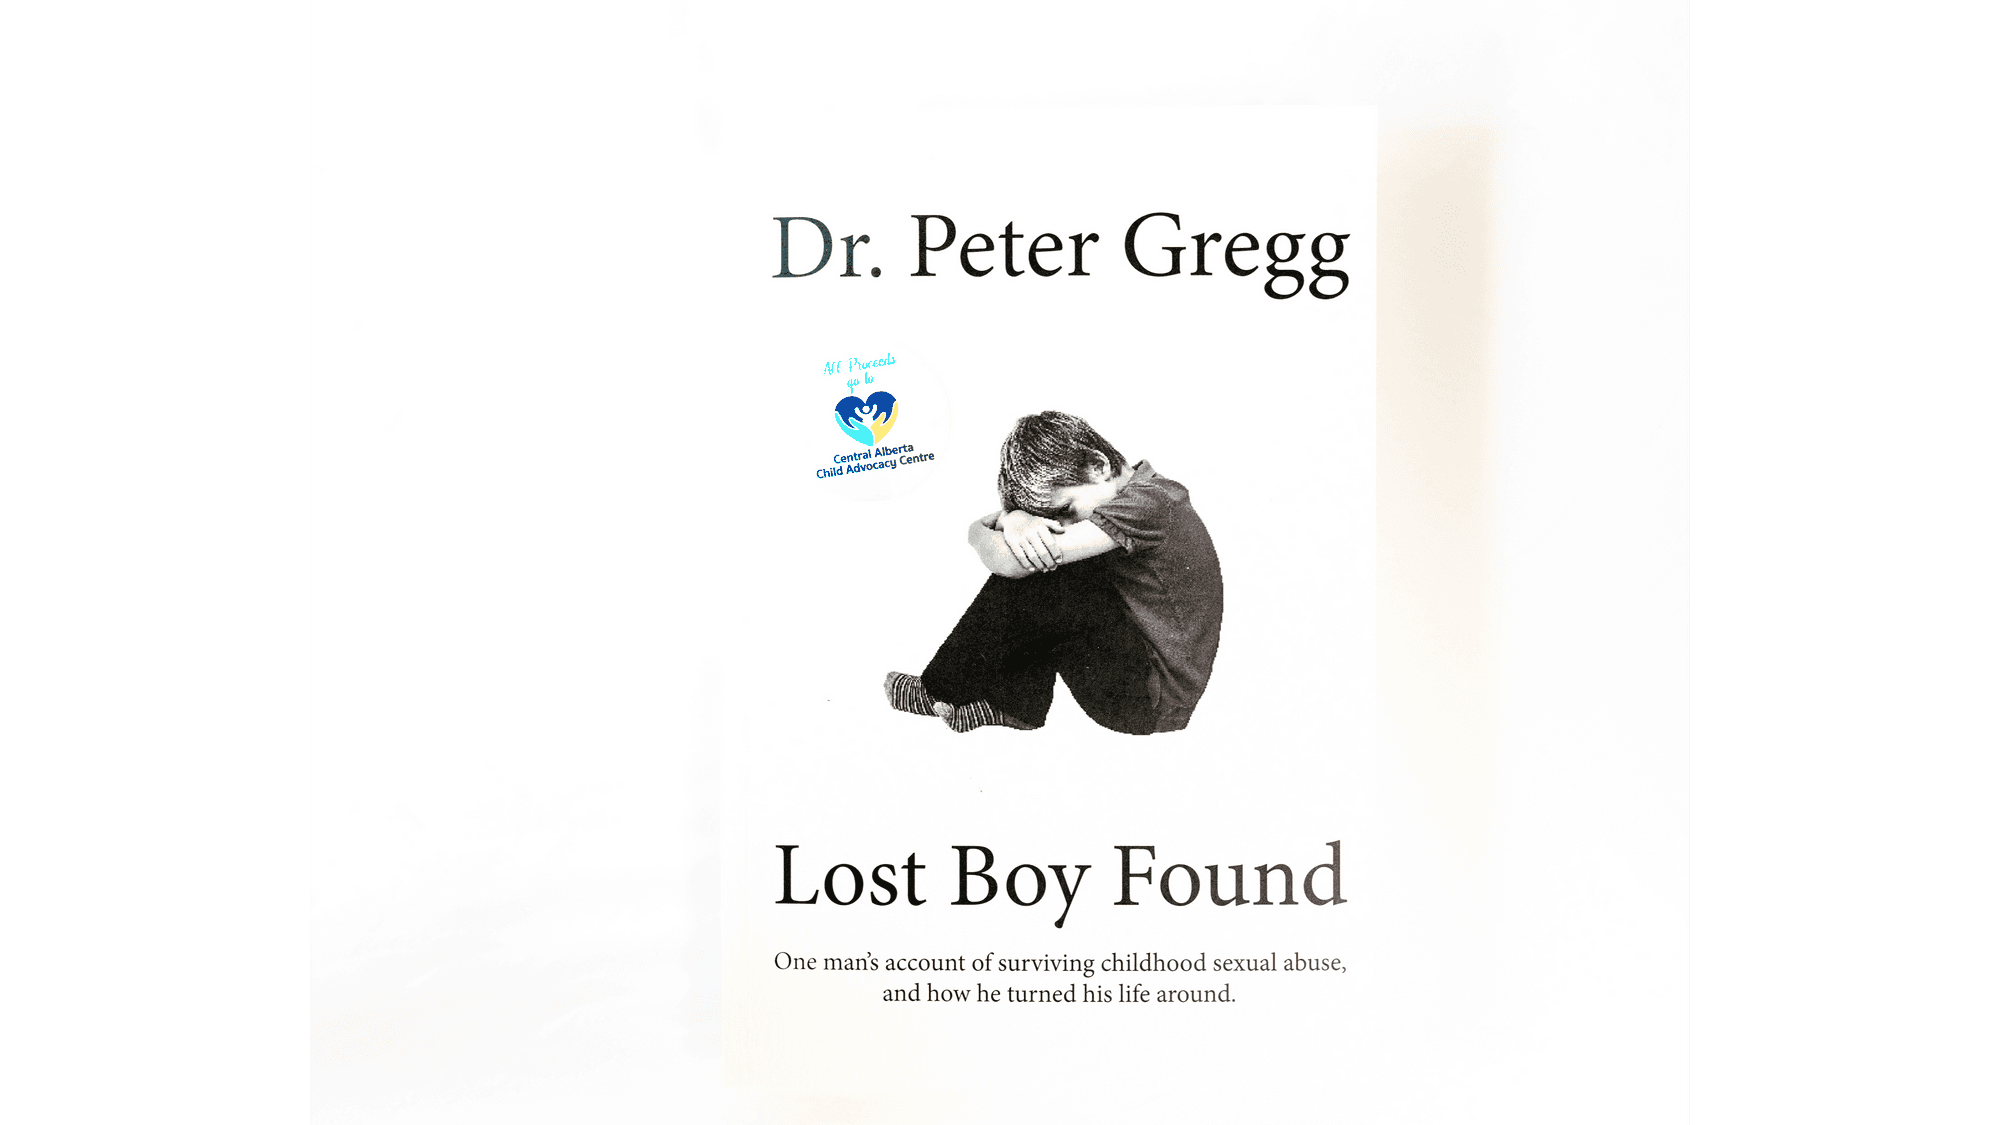 "Lost Boy Found" by Dr. Peter Gregg